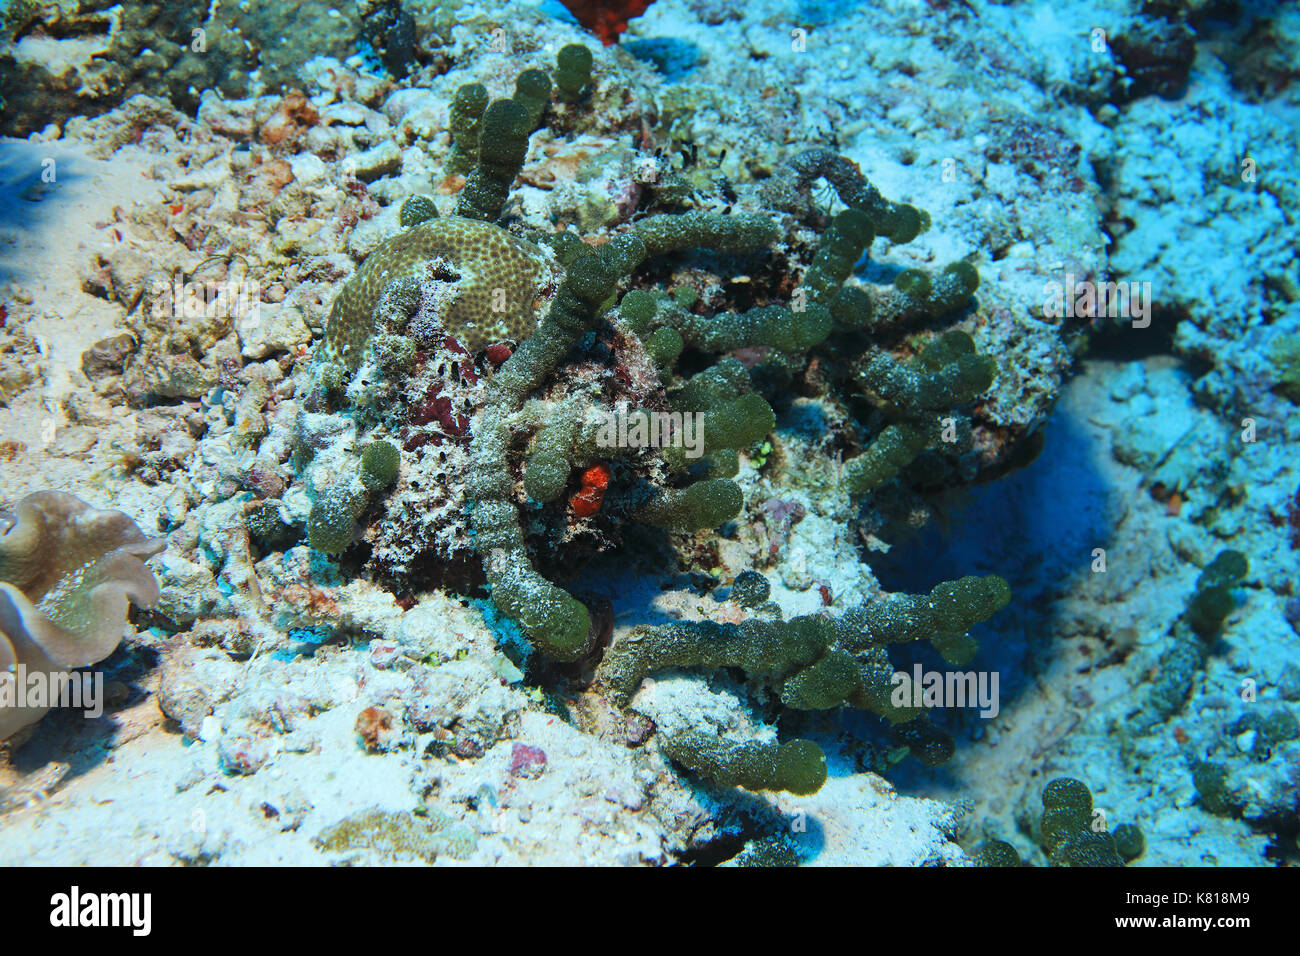 Green sea beads algae (Tydemania expeditionis) underwater in the tropical coral reef Stock Photo